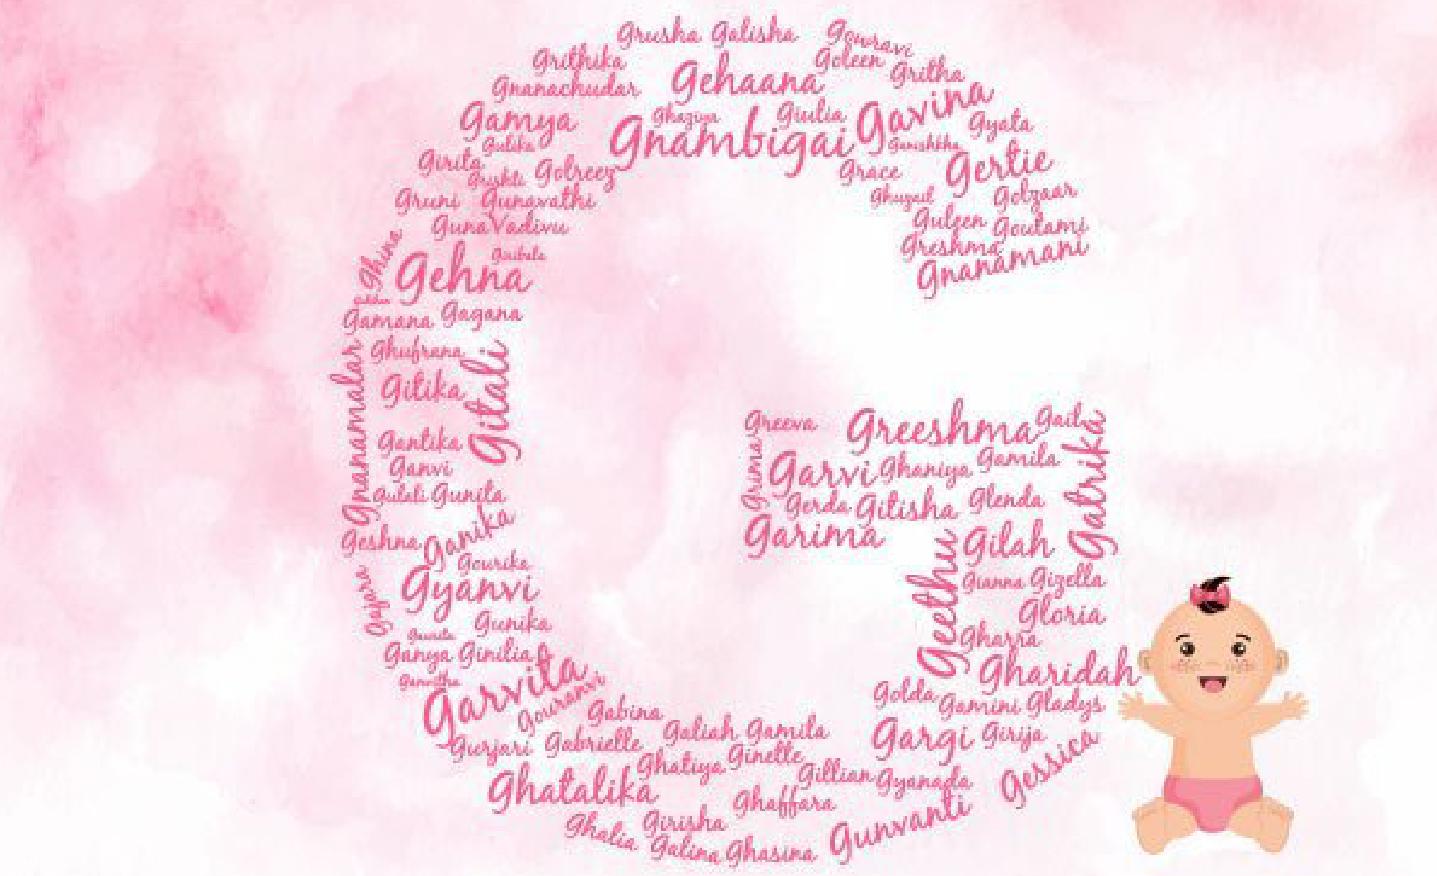 Here is a mix of traditional and modern baby girl names starting with G